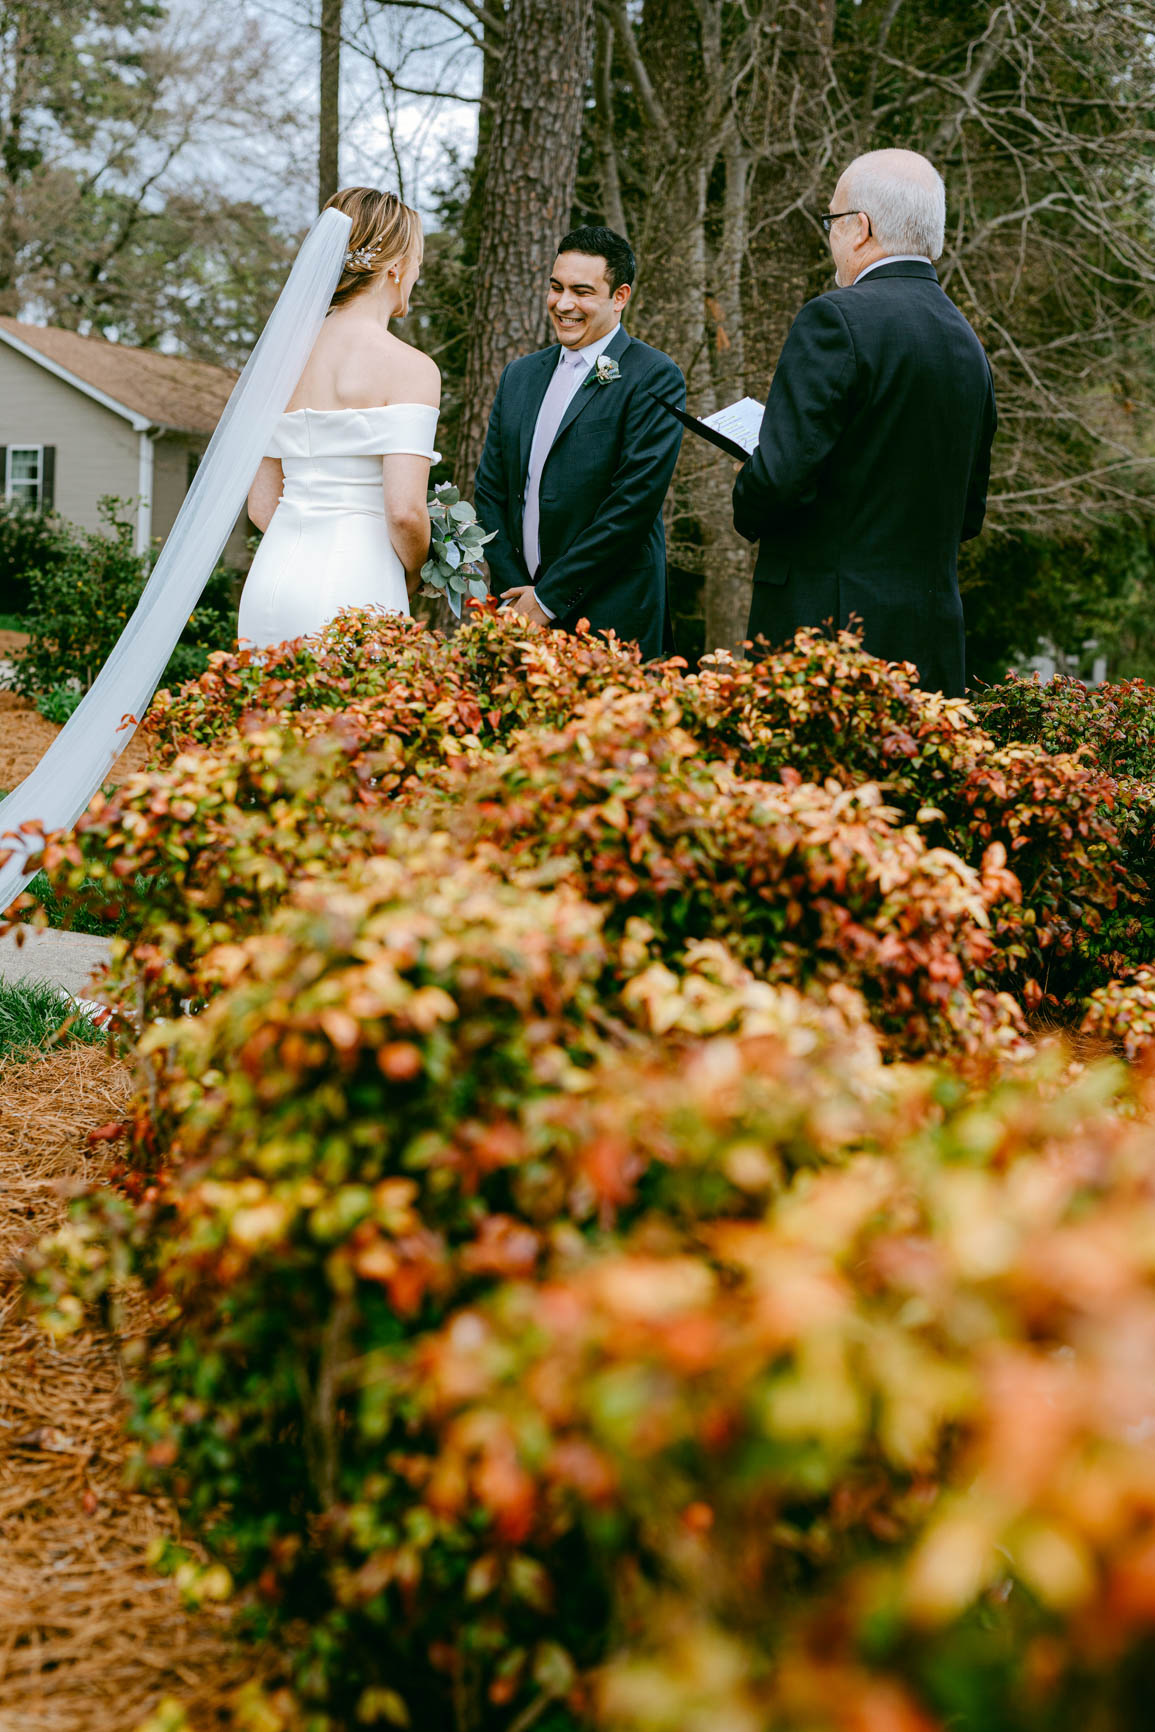 elopement ceremony in Mooresville, NC lake house shot by Nhieu Tang Photography | nhieutang.com